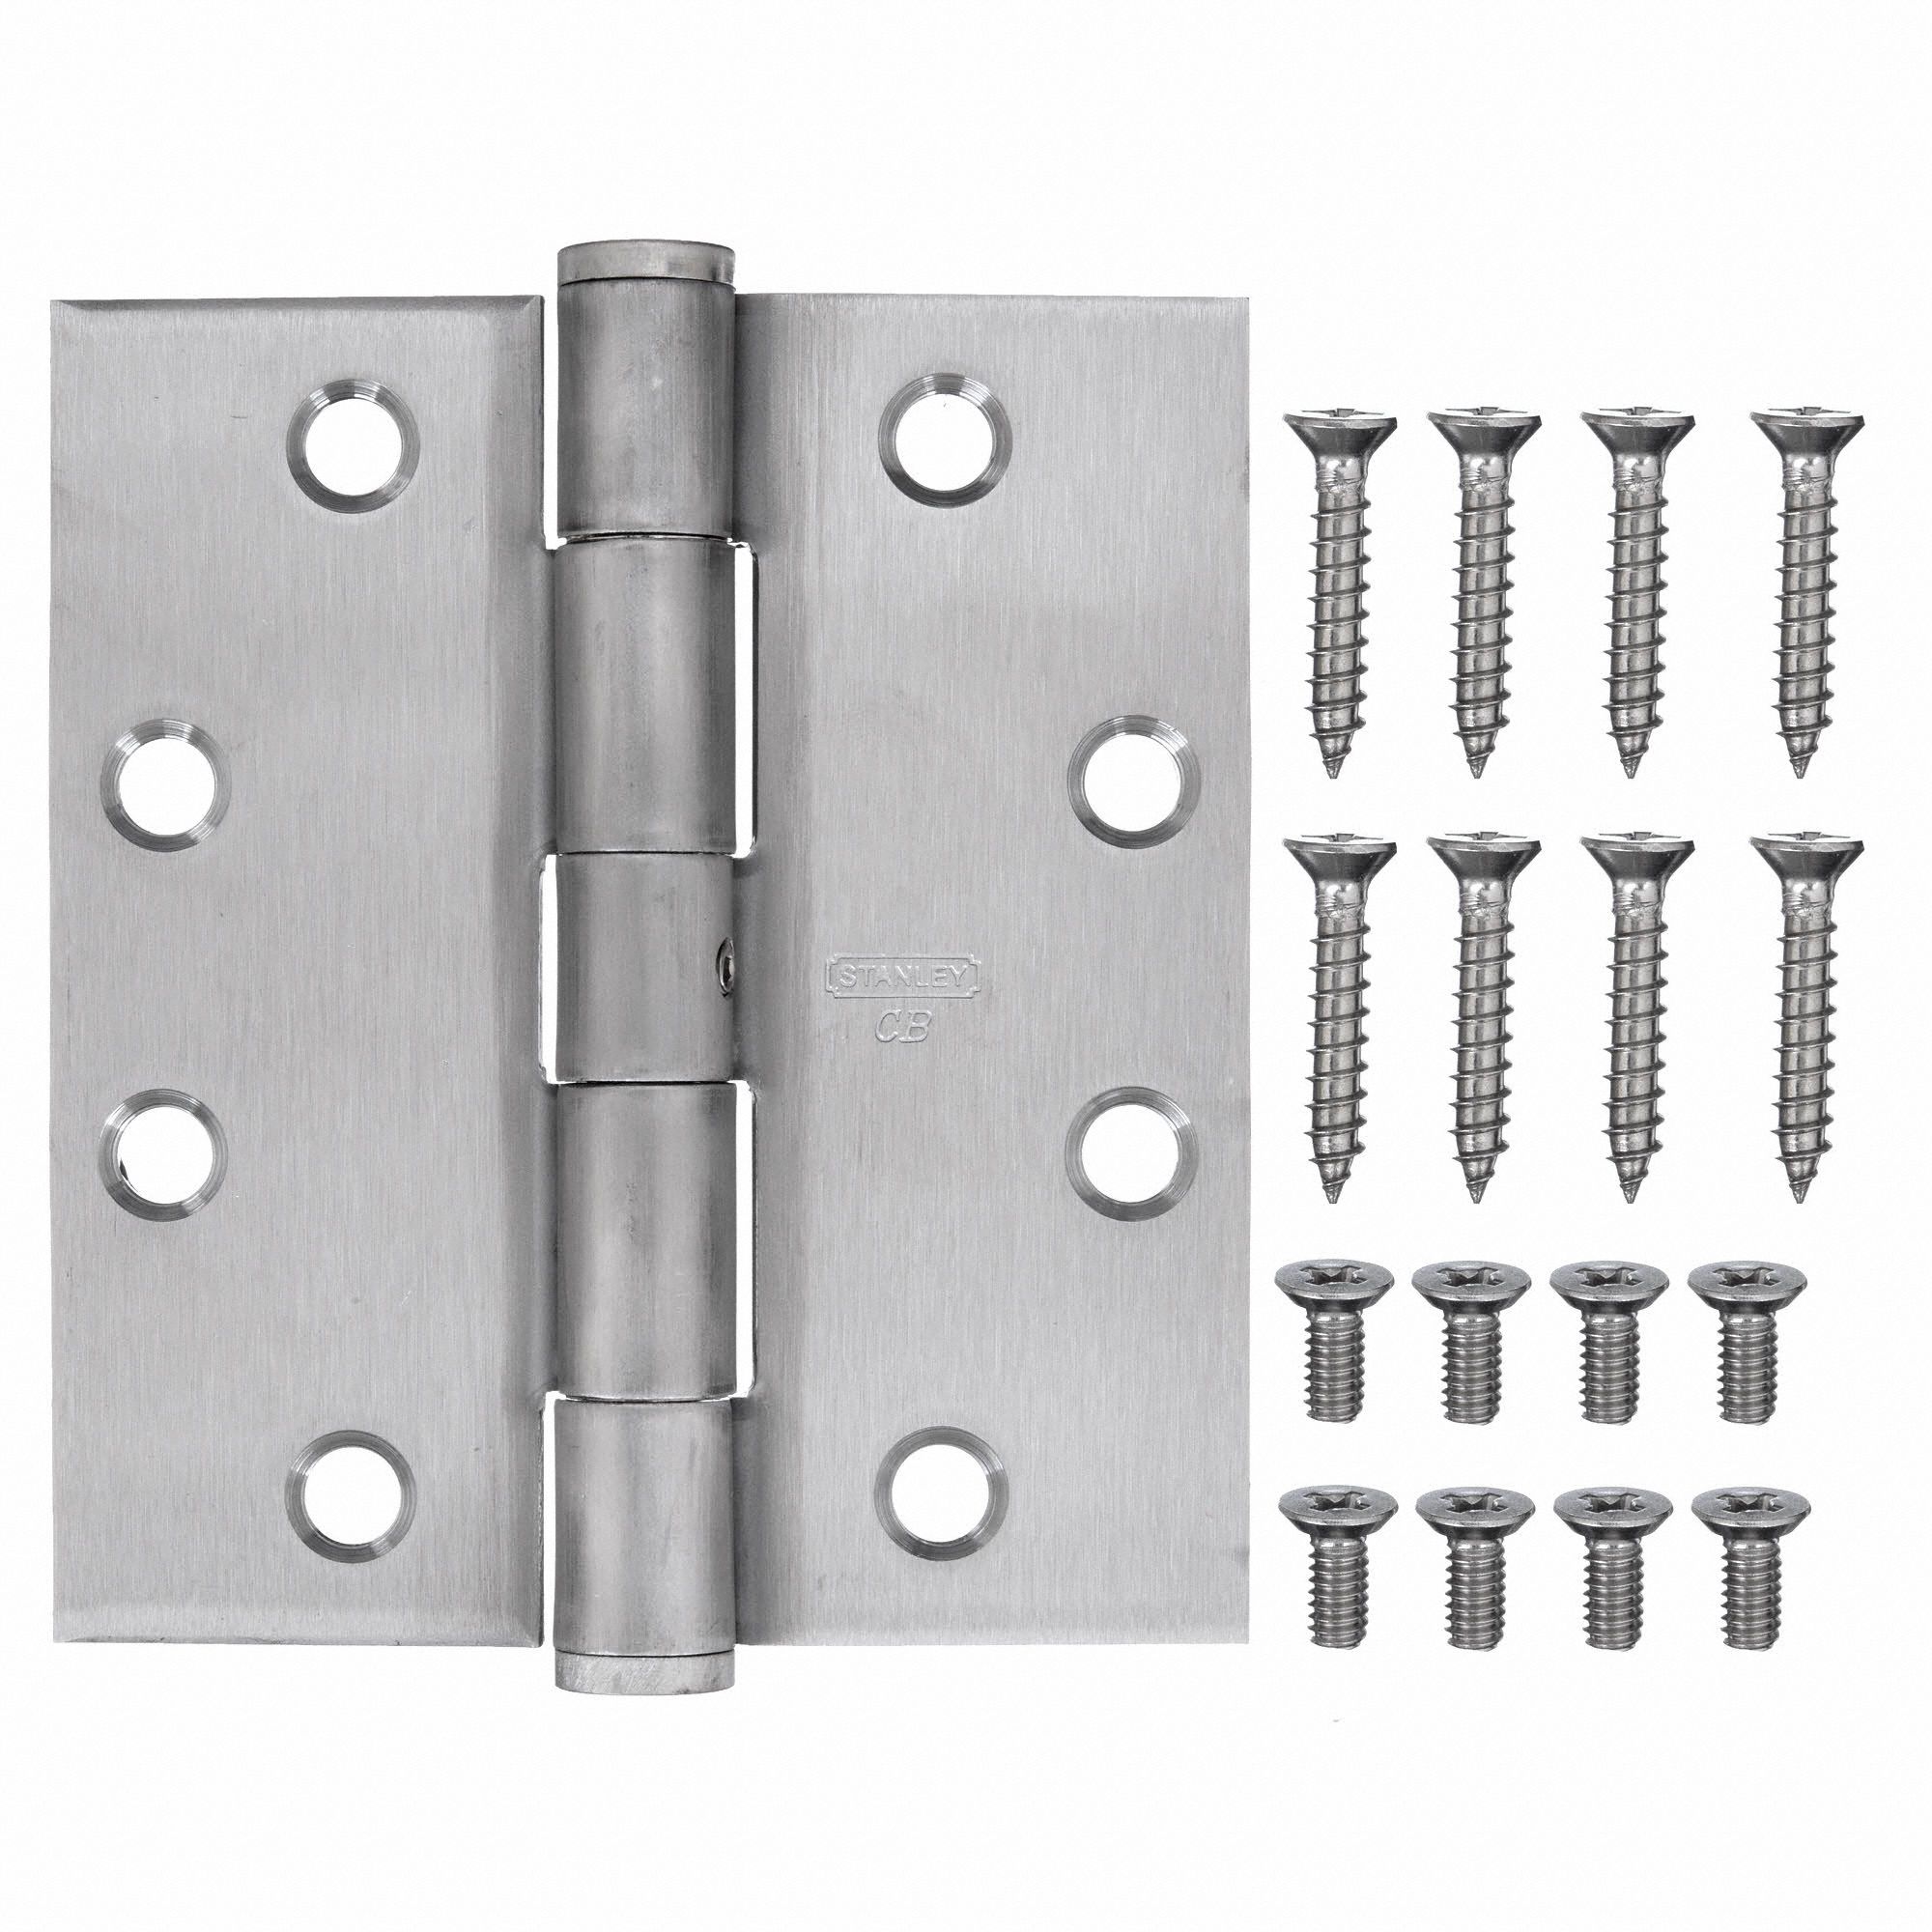 12-7400  2 x 2 Butt Hinge Full Mortise Mounting Lot of 10 Stanley® Tools 